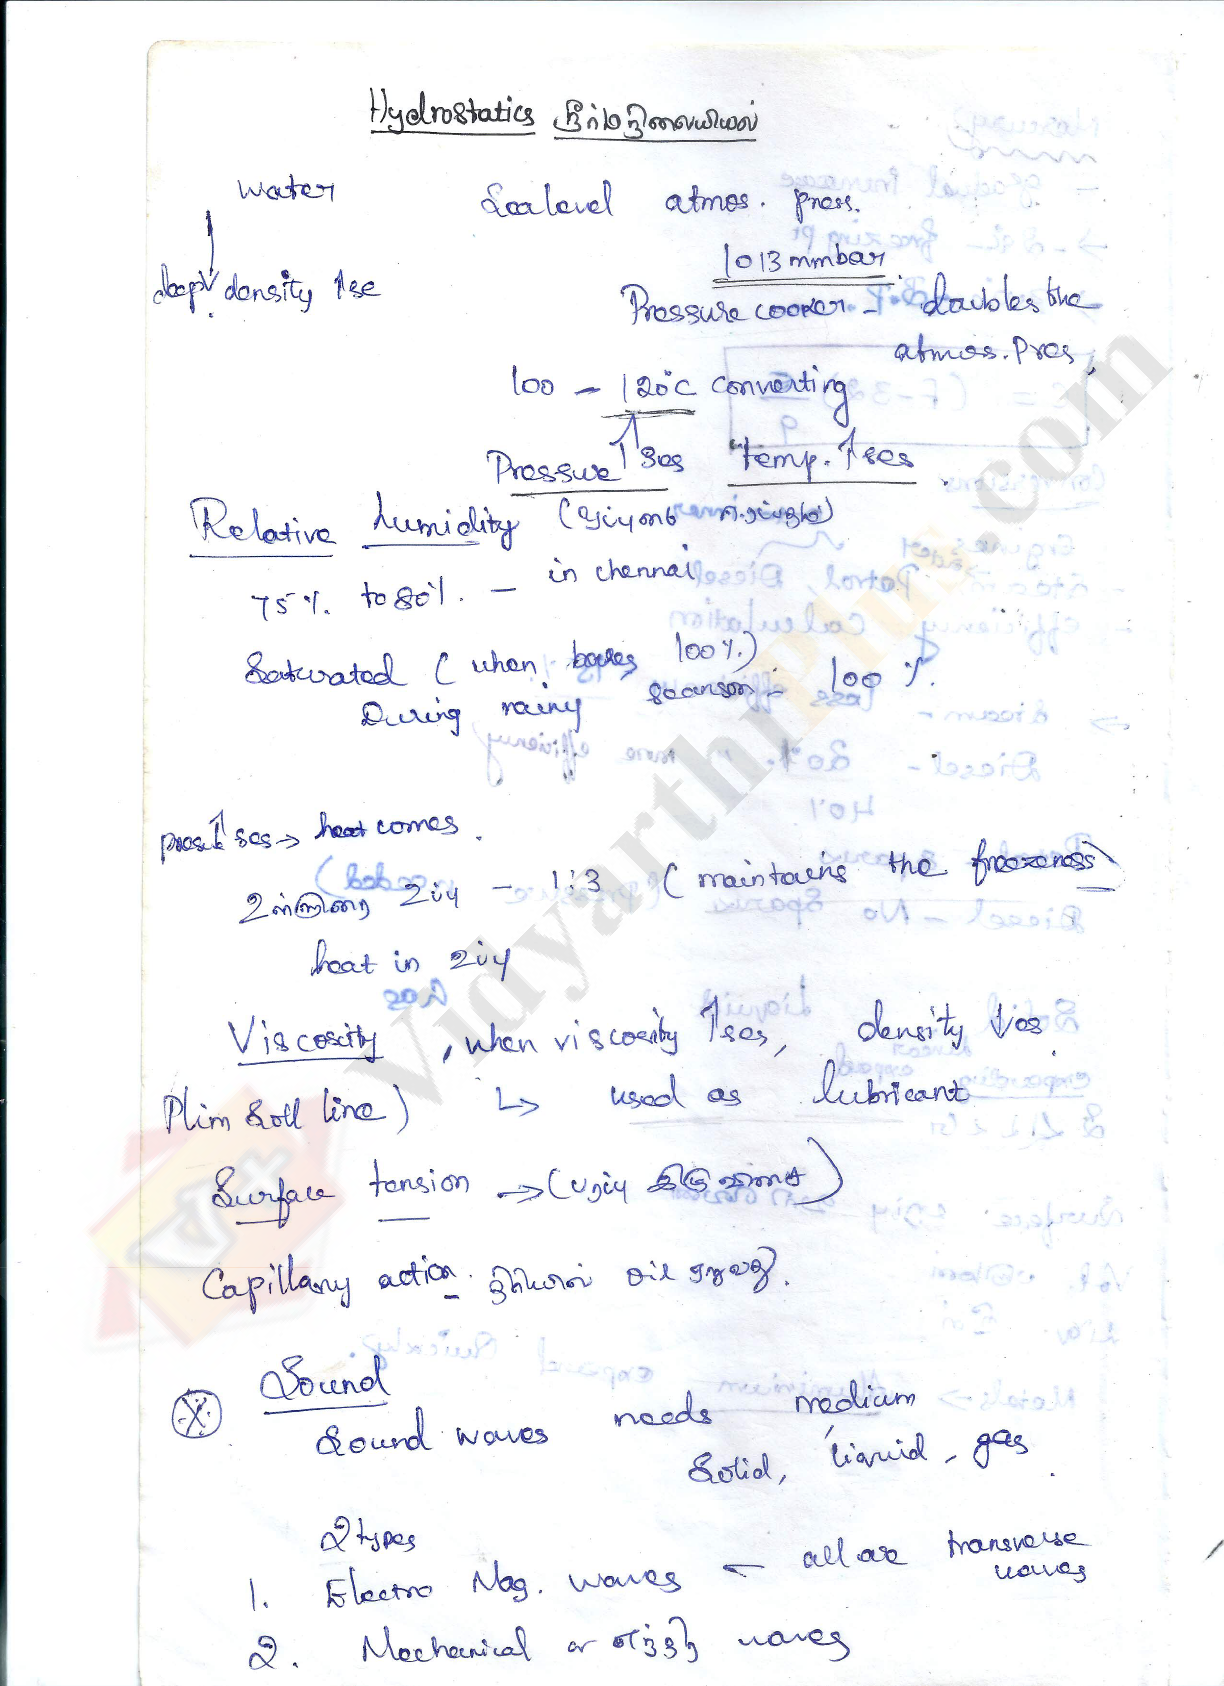 TNPSC Science (English) Lecture Notes - Lavanya Edition